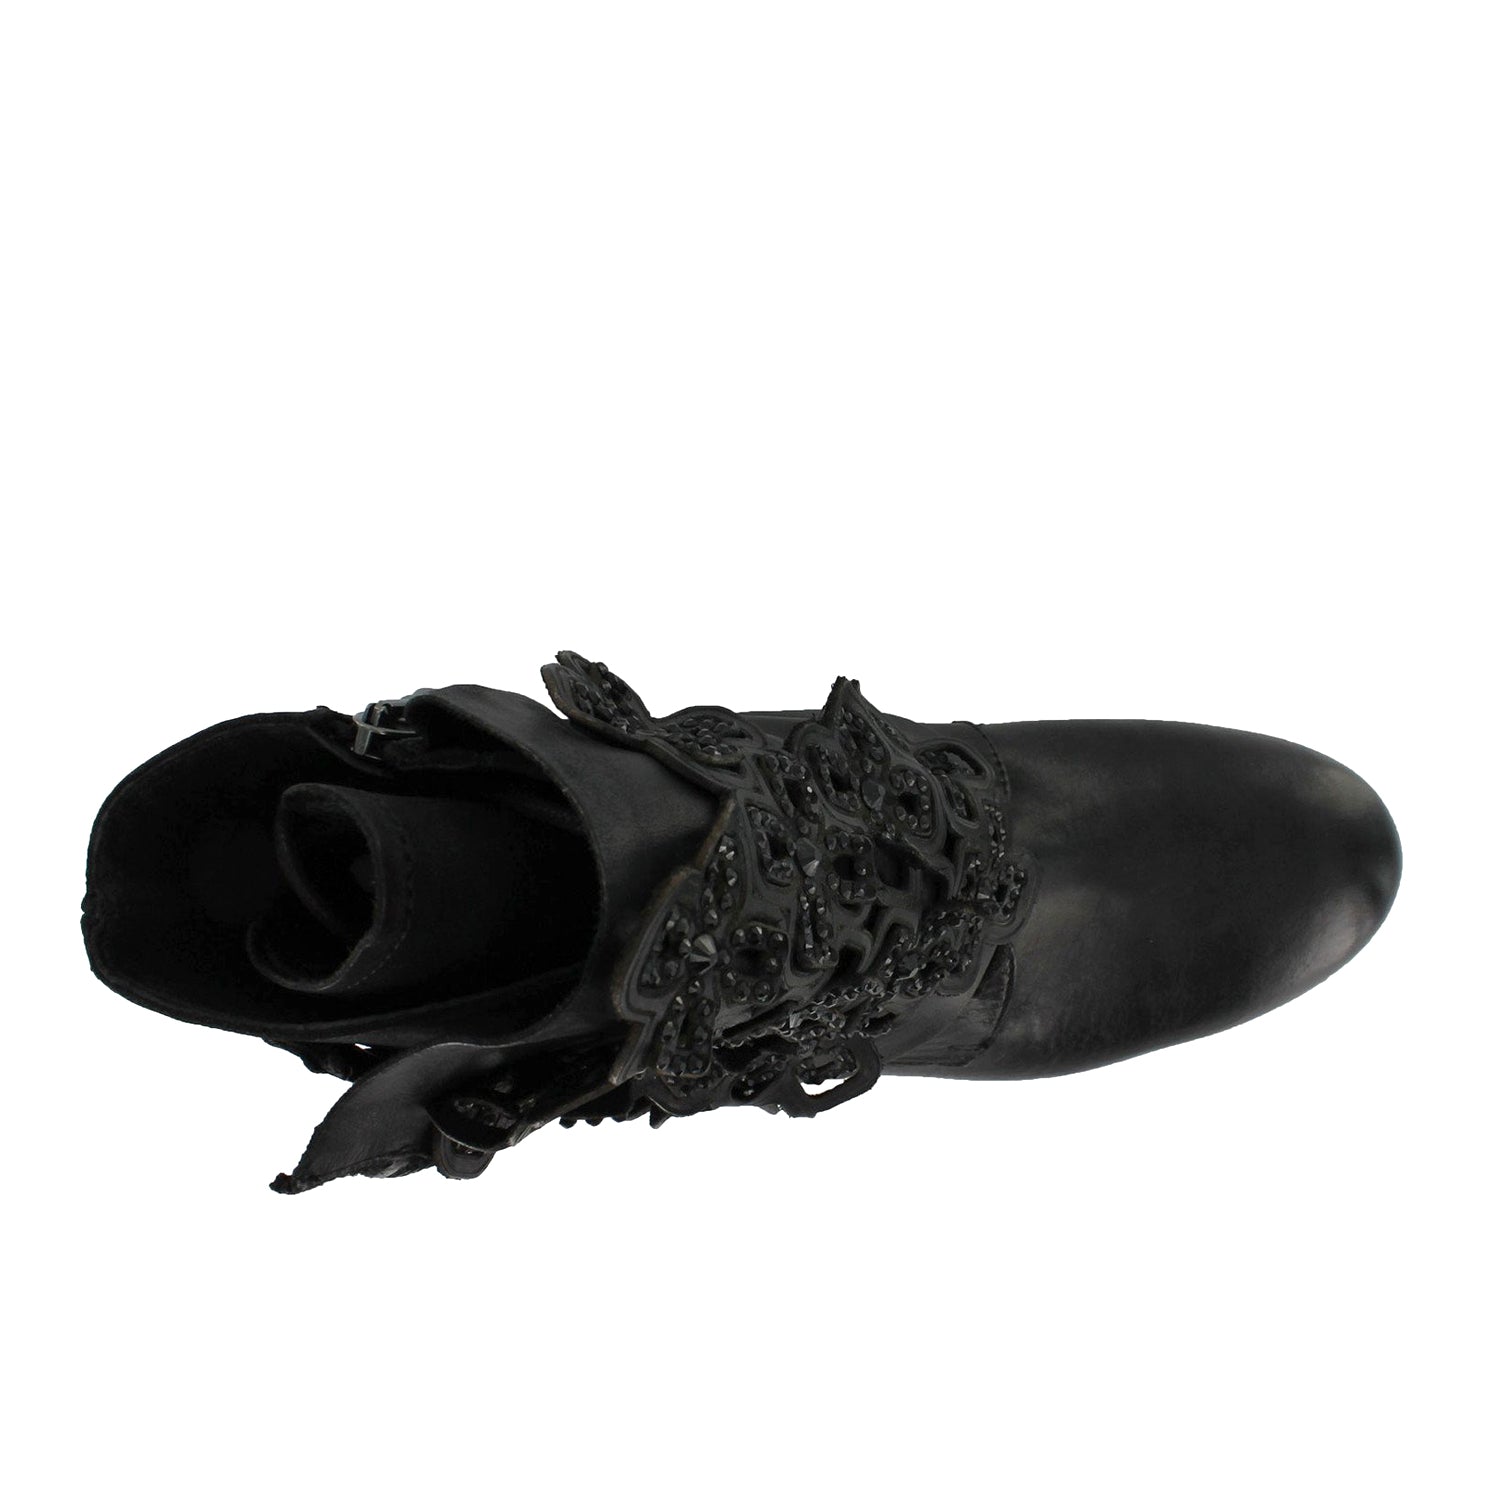 3577X51- Black Ankle Boot With Flower Pattern